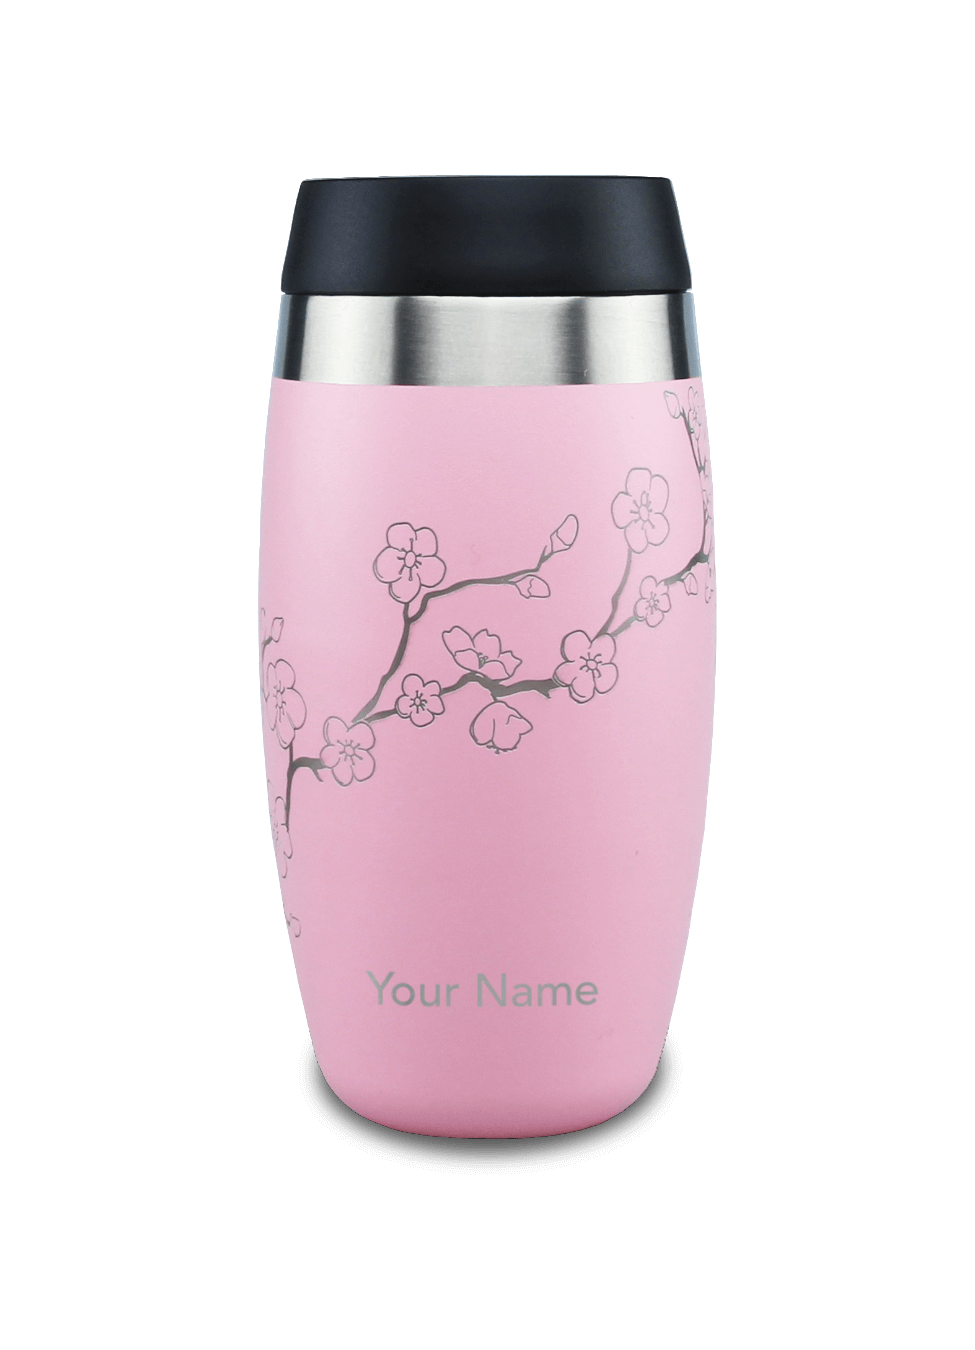 Personalised insulated travel mug in pink with cherry blossom design